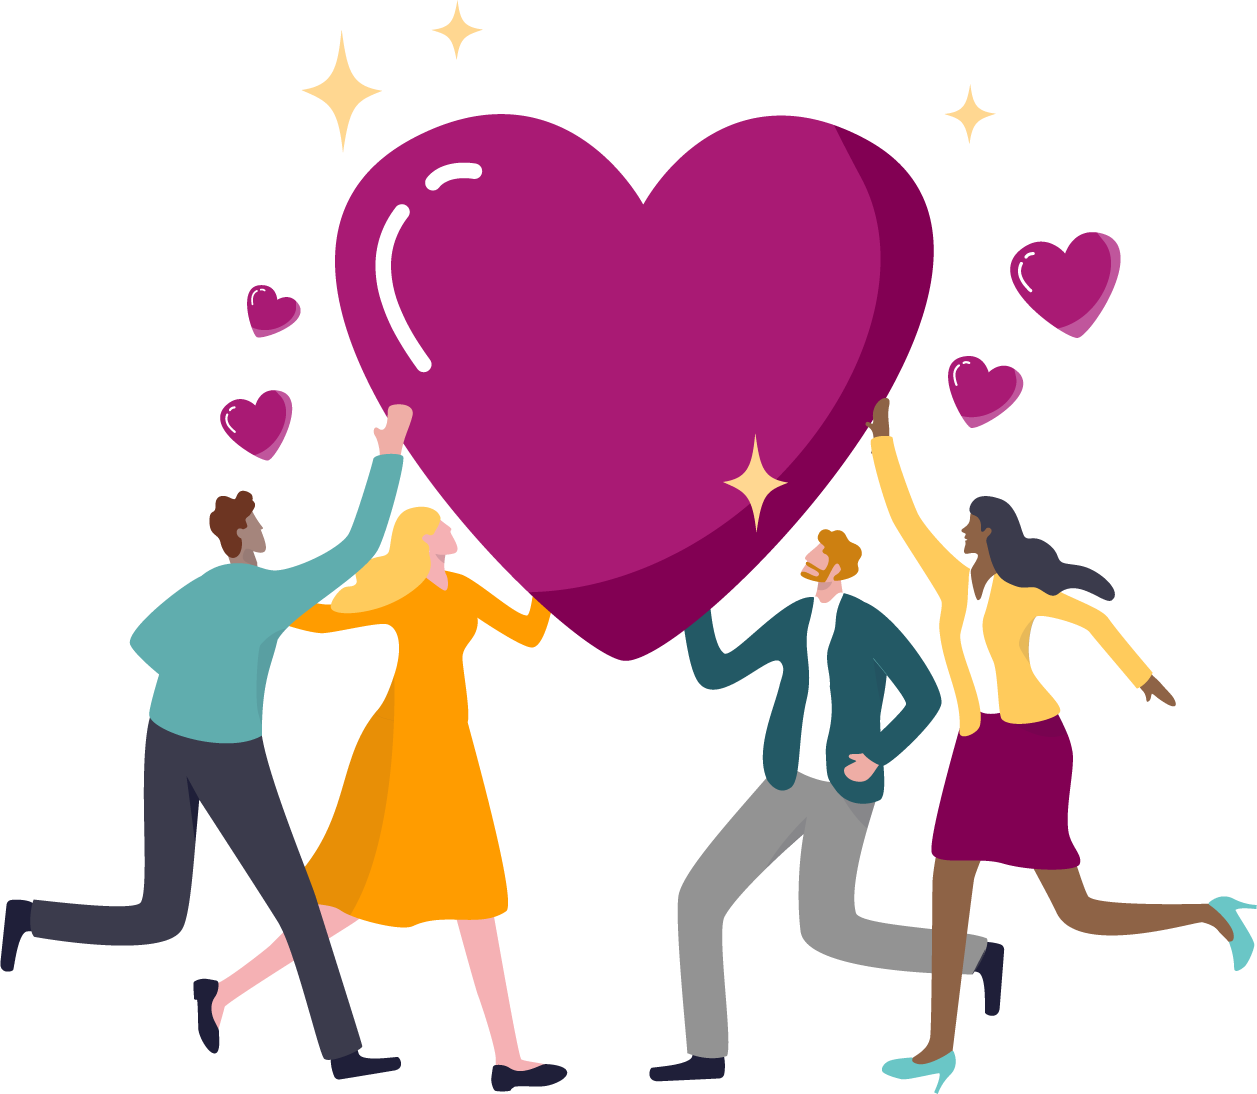 graphic of a group of people holding up a large heart